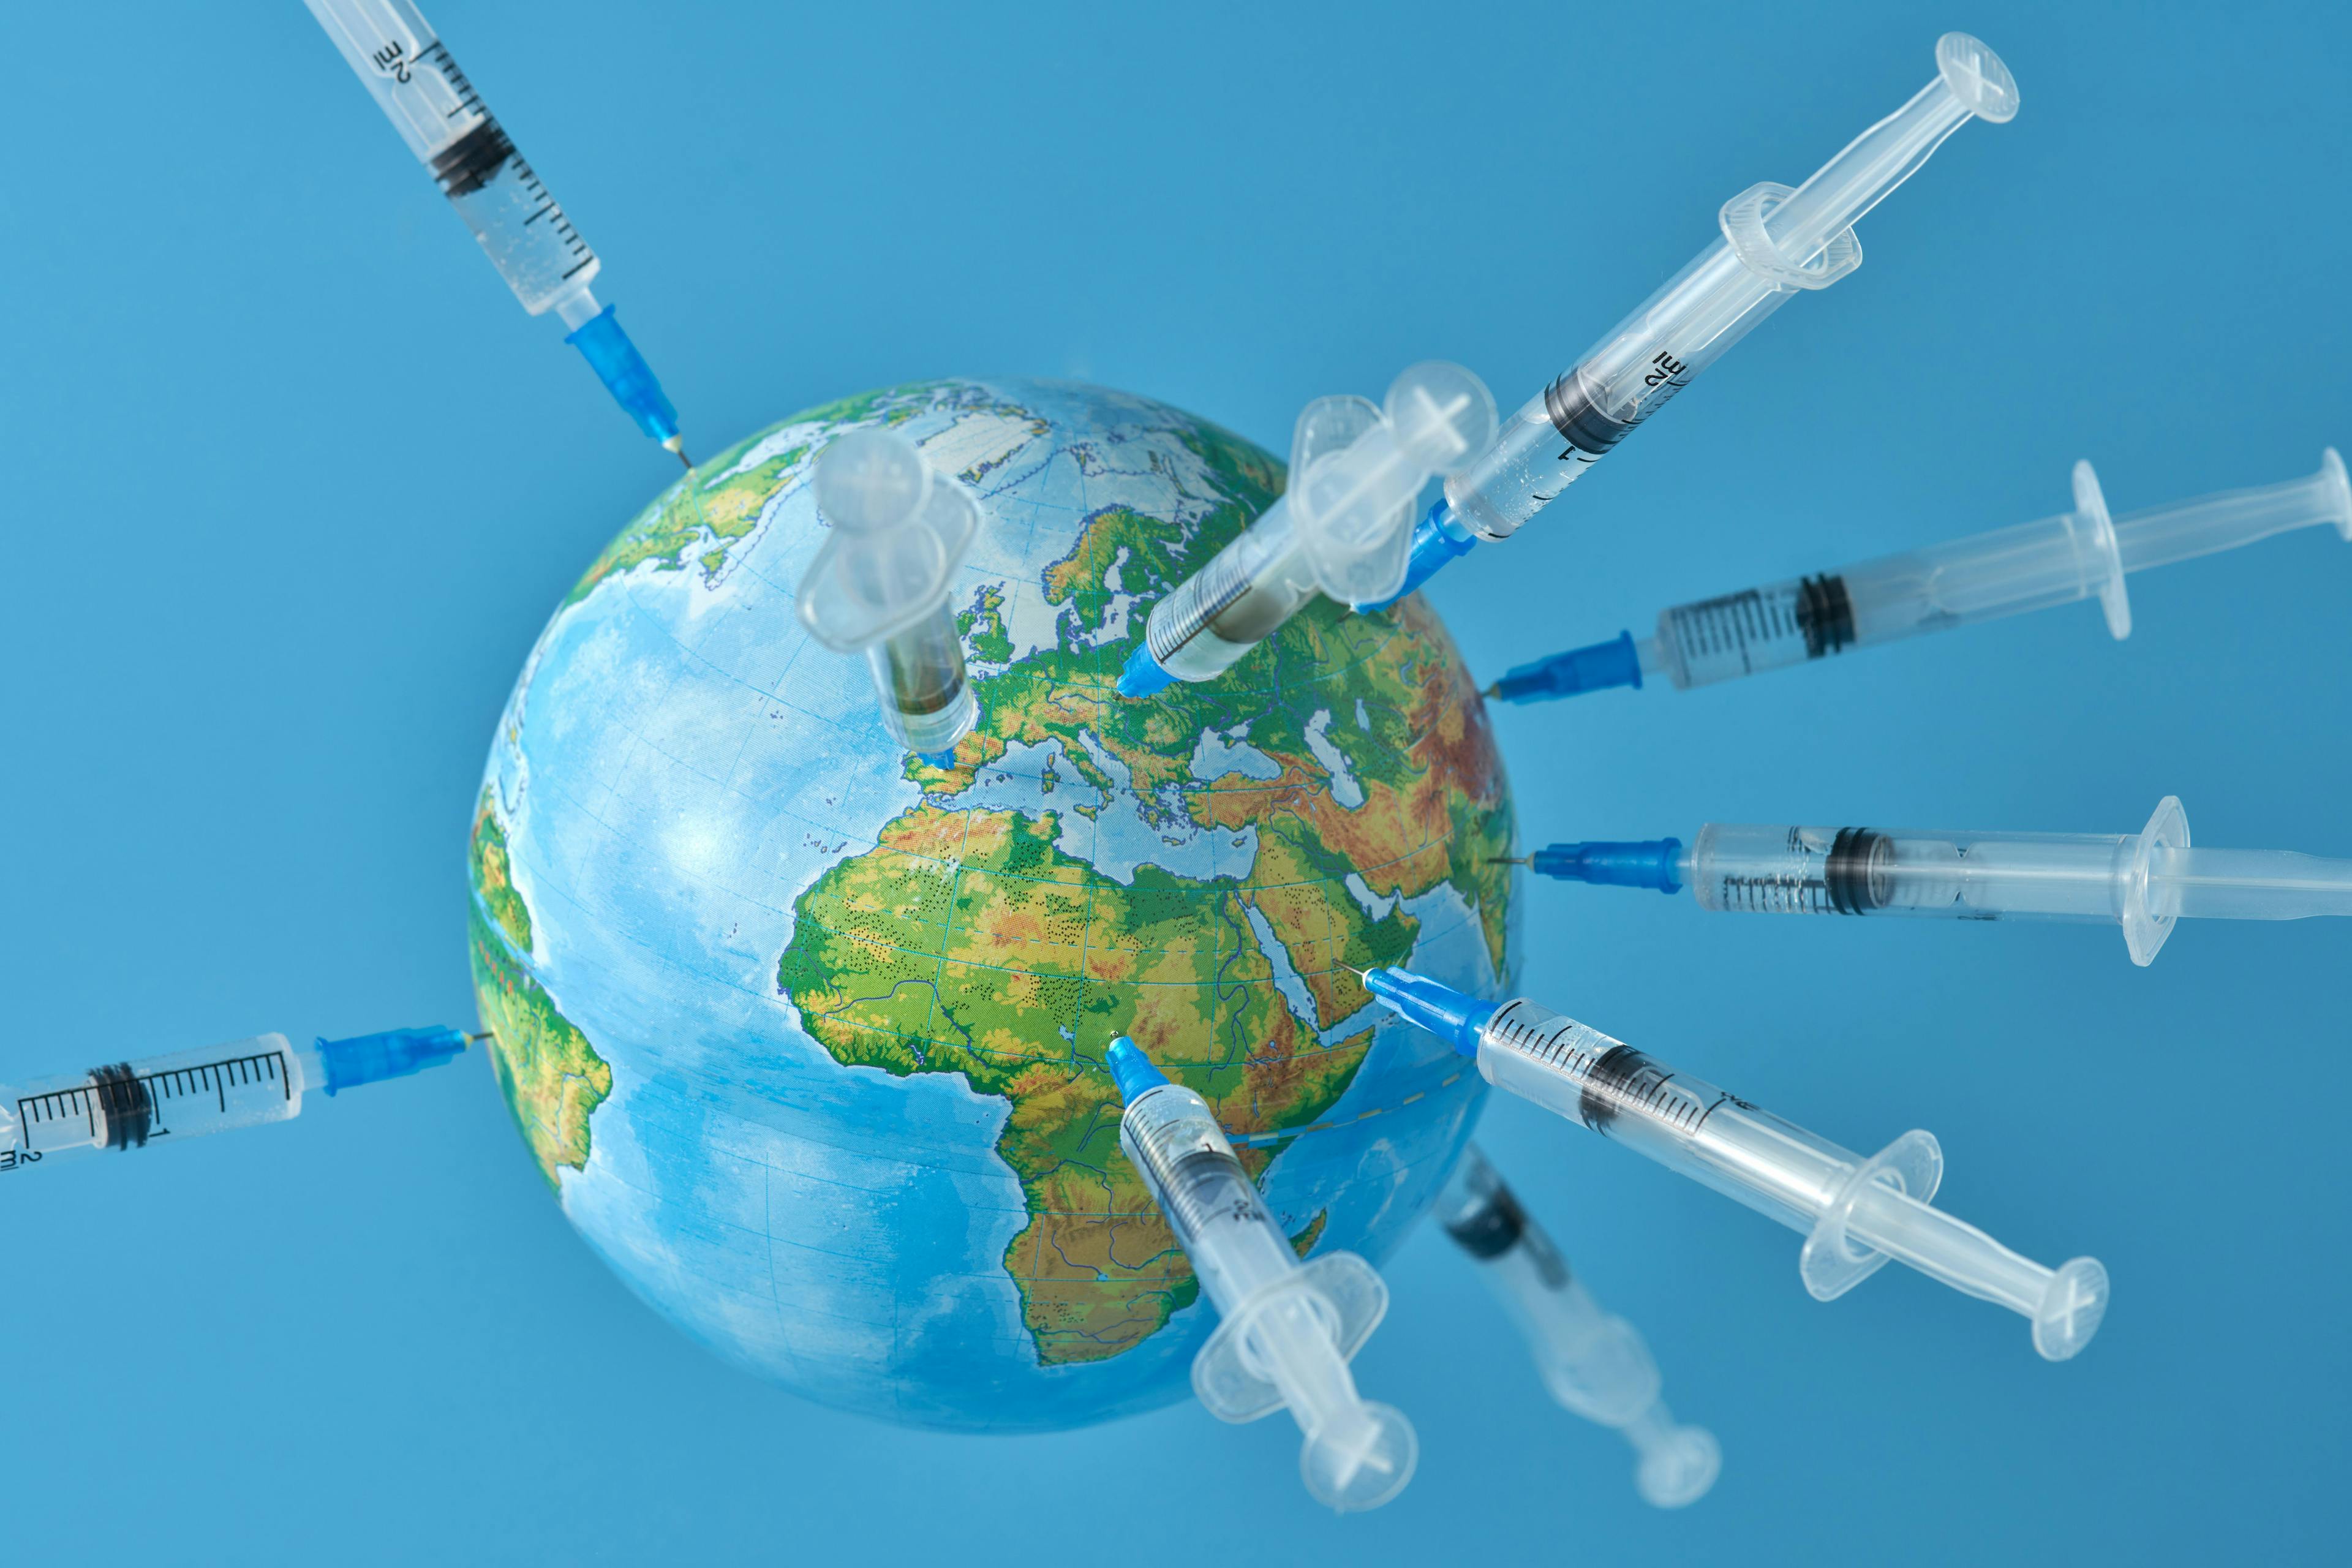 This examination of vaccine introductions worldwide reveals significant gaps in access, especially in low-income countries.